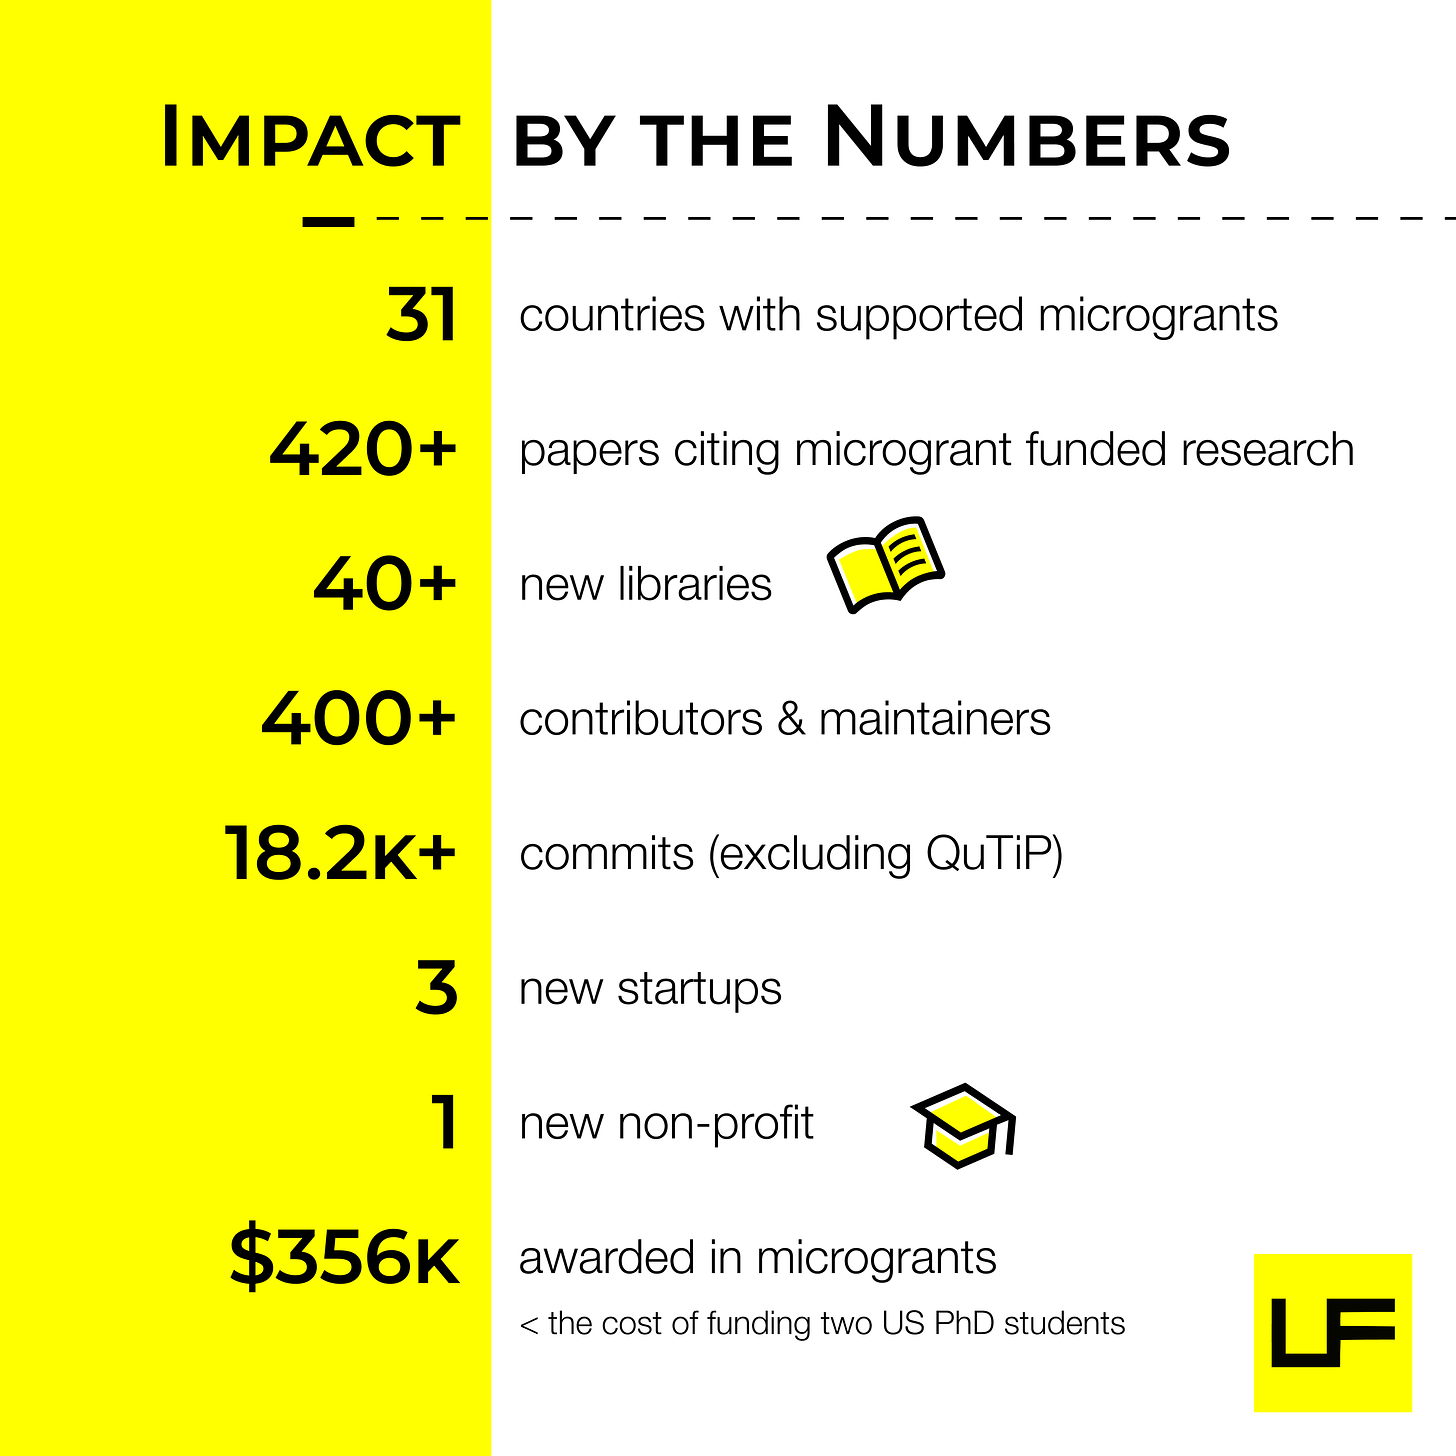 Impact by the Numbers: 31 Countries Supported, 420+ Papers citing microgrant funded research, 40+ New Libraries, 400+ Contributors & Maintainers, 18.2k+ Commits (excluding QuTiP), 3 startups and 1 non-profit, $356k awarded in microgrants